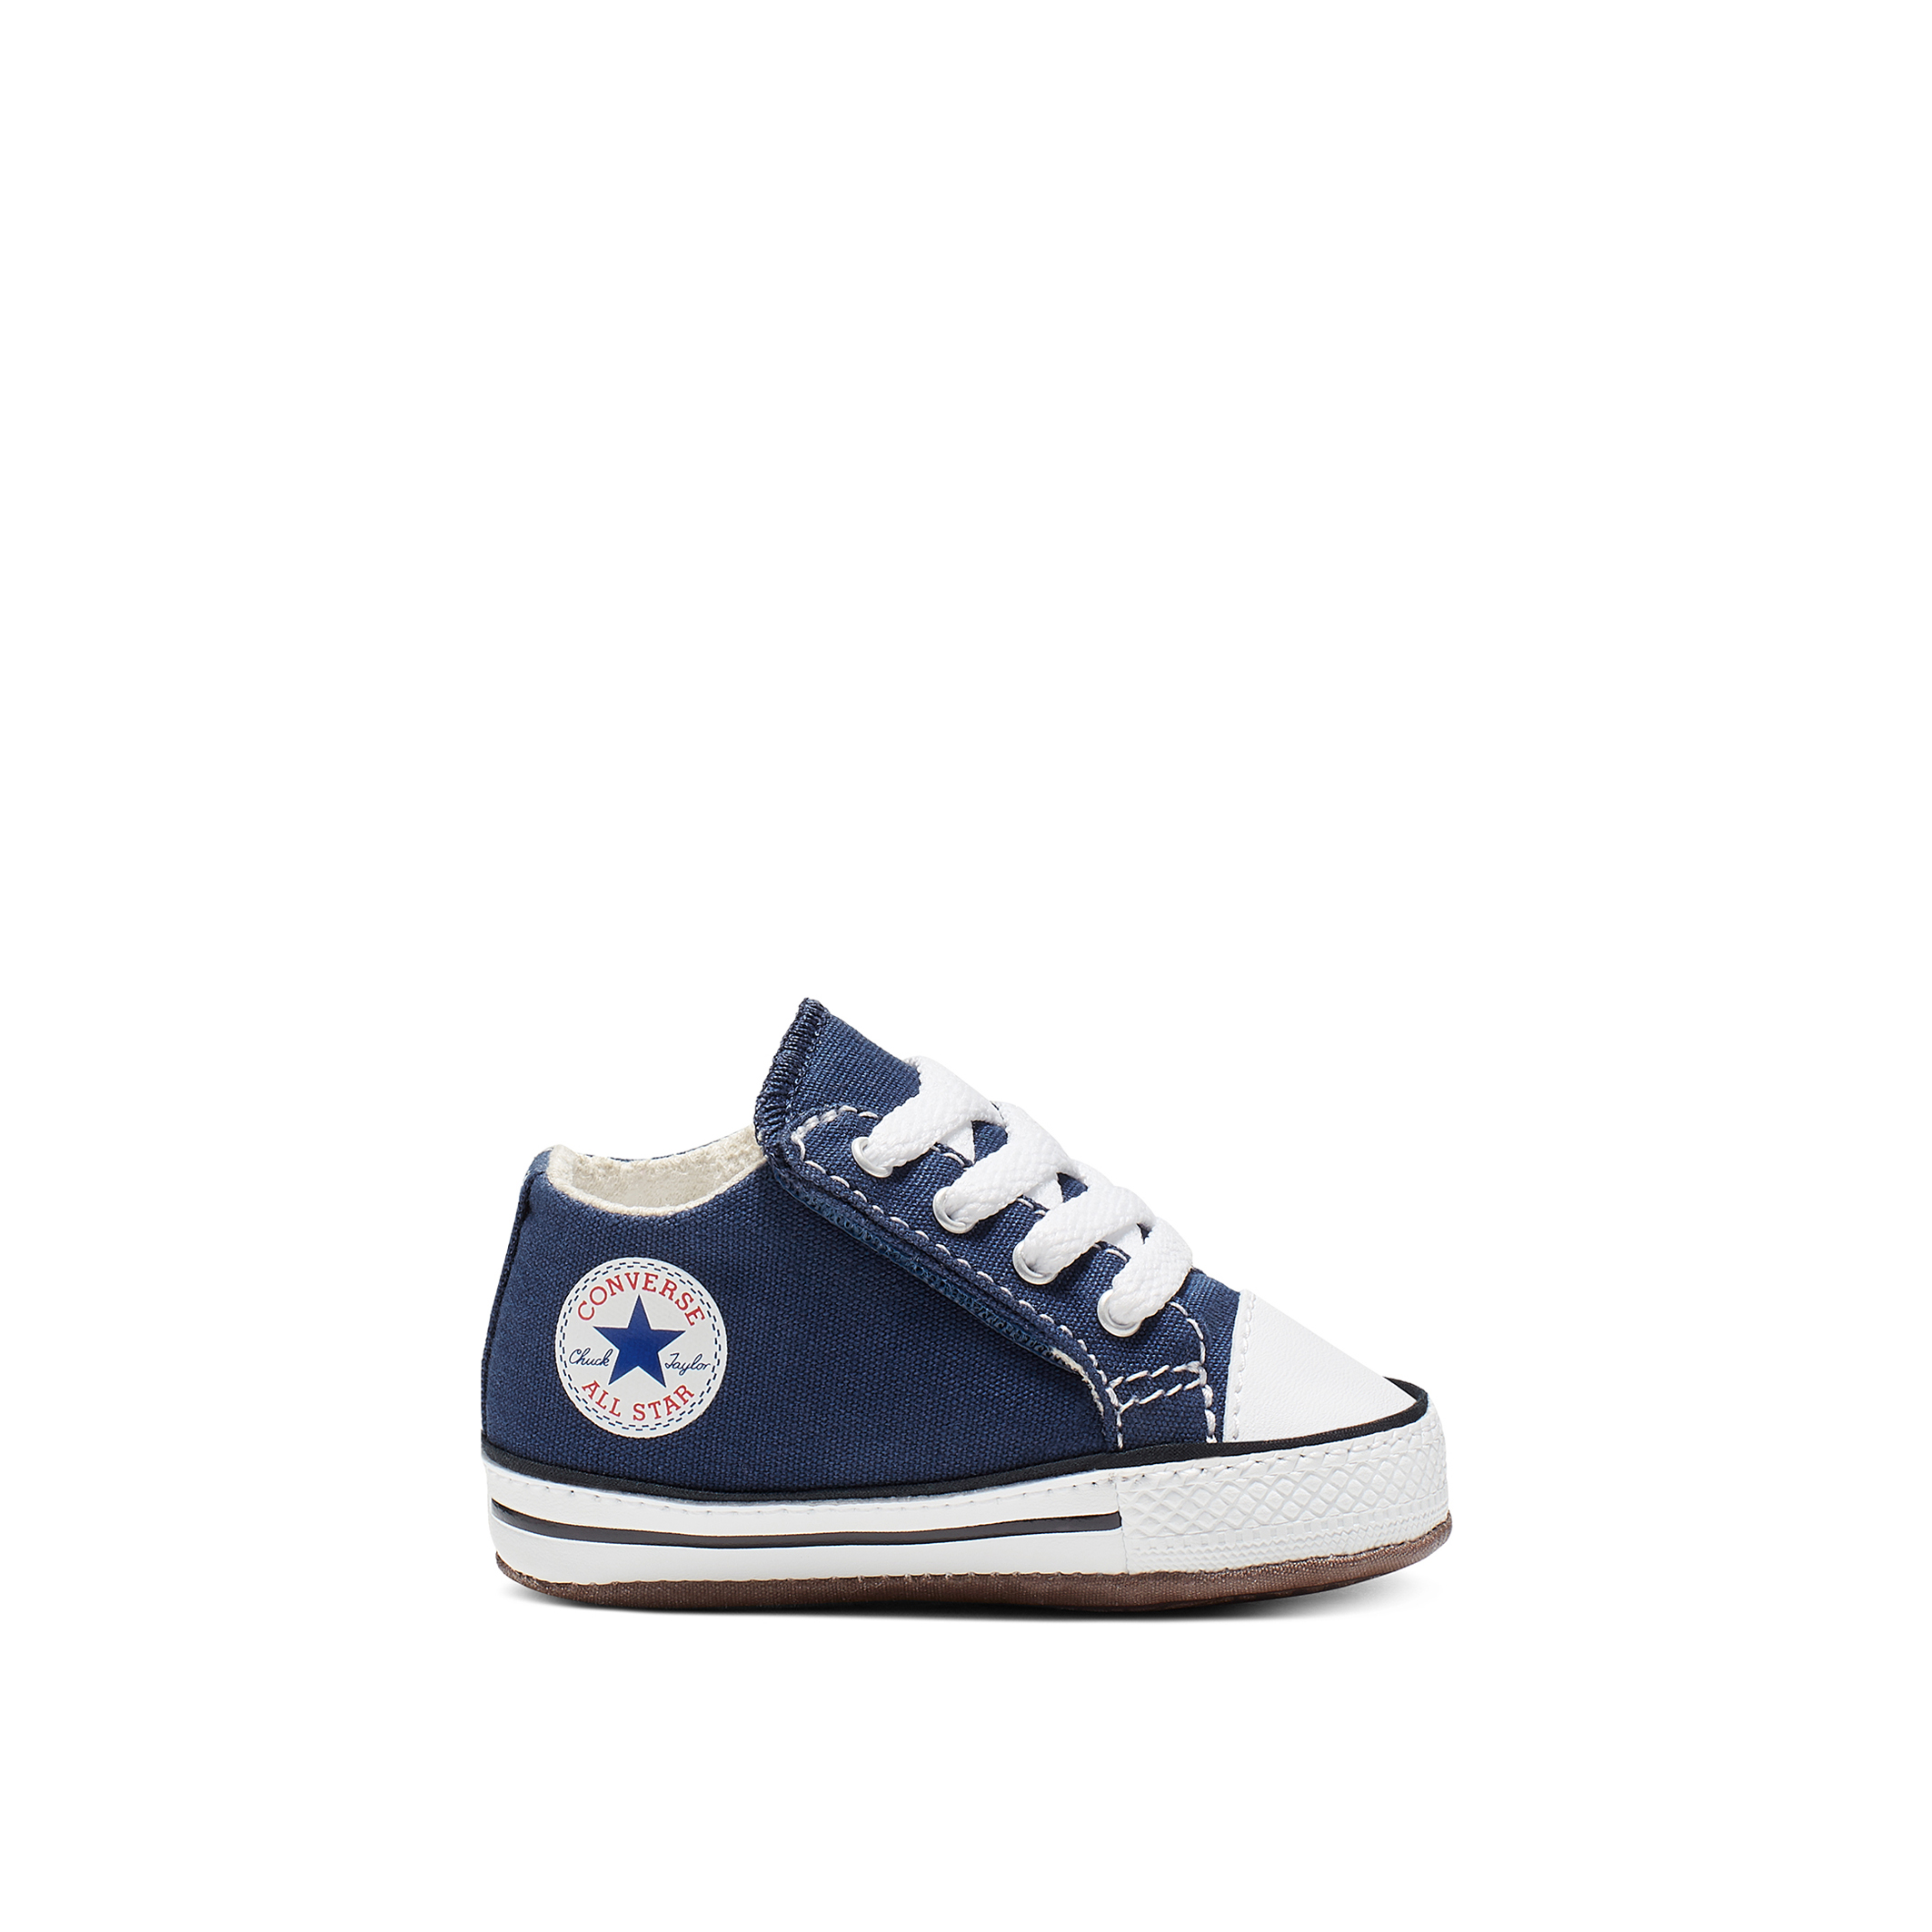 Kids chuck taylor all star cribster canvas trainers, navy blue ...